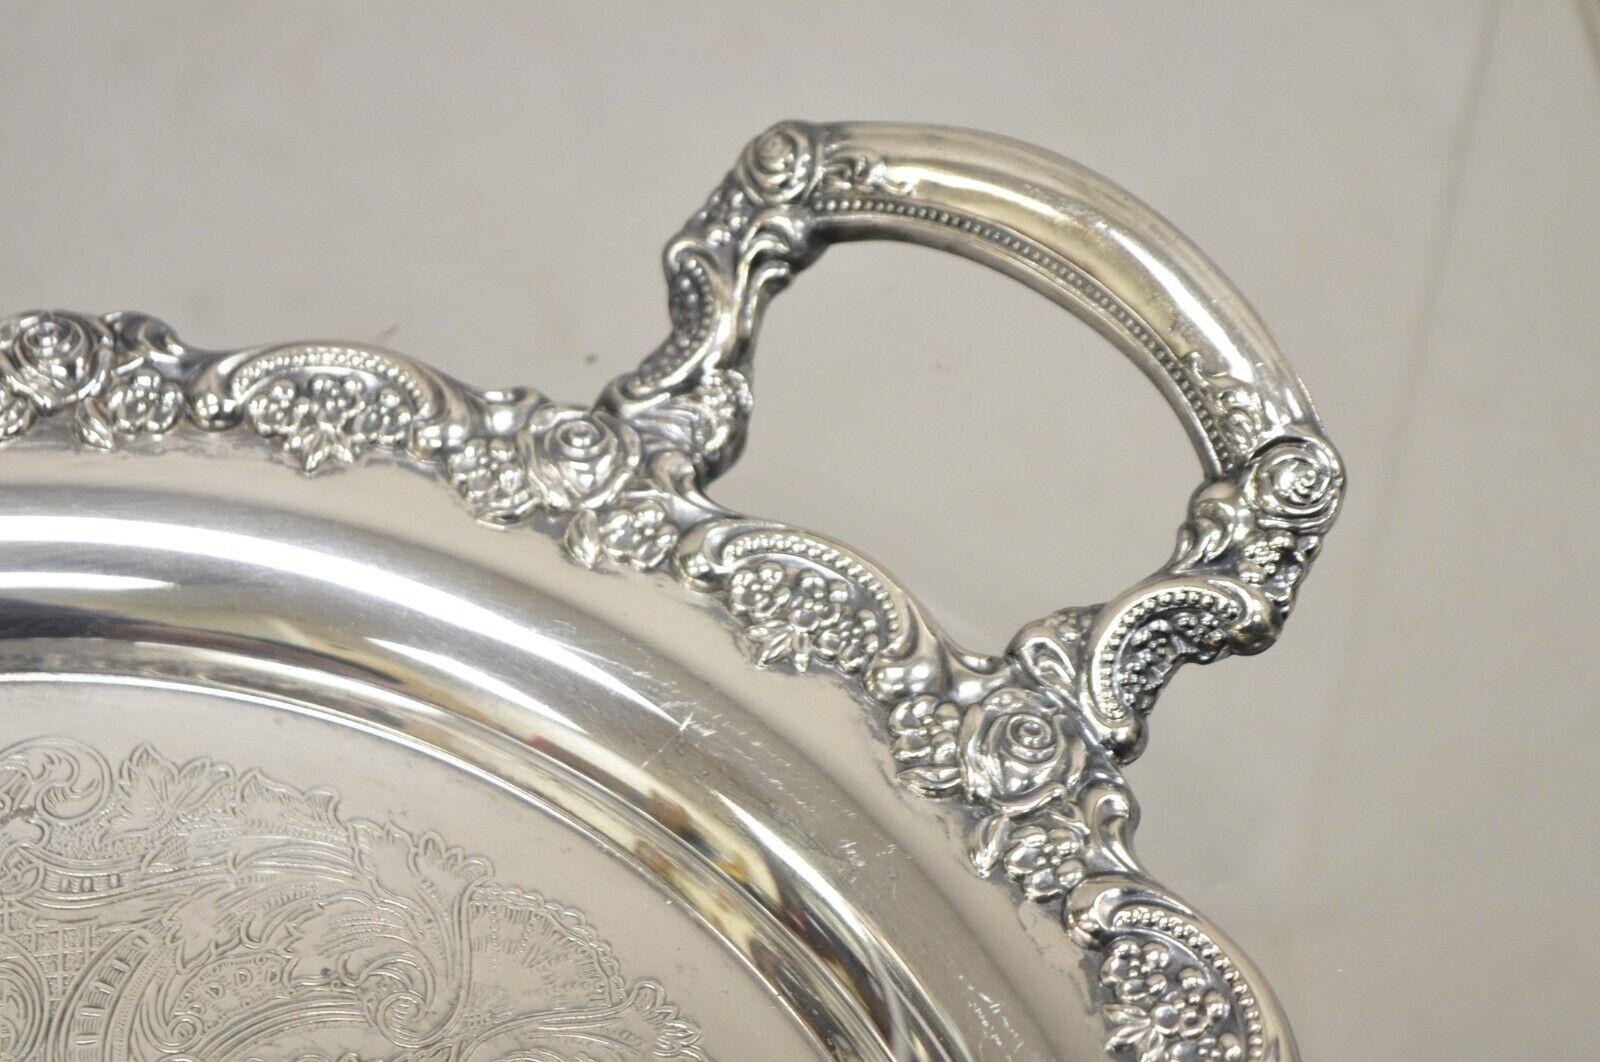 Vtg Oneida Victorian Style Round Silver Plated Serving Platter Tray w handles en vente 1